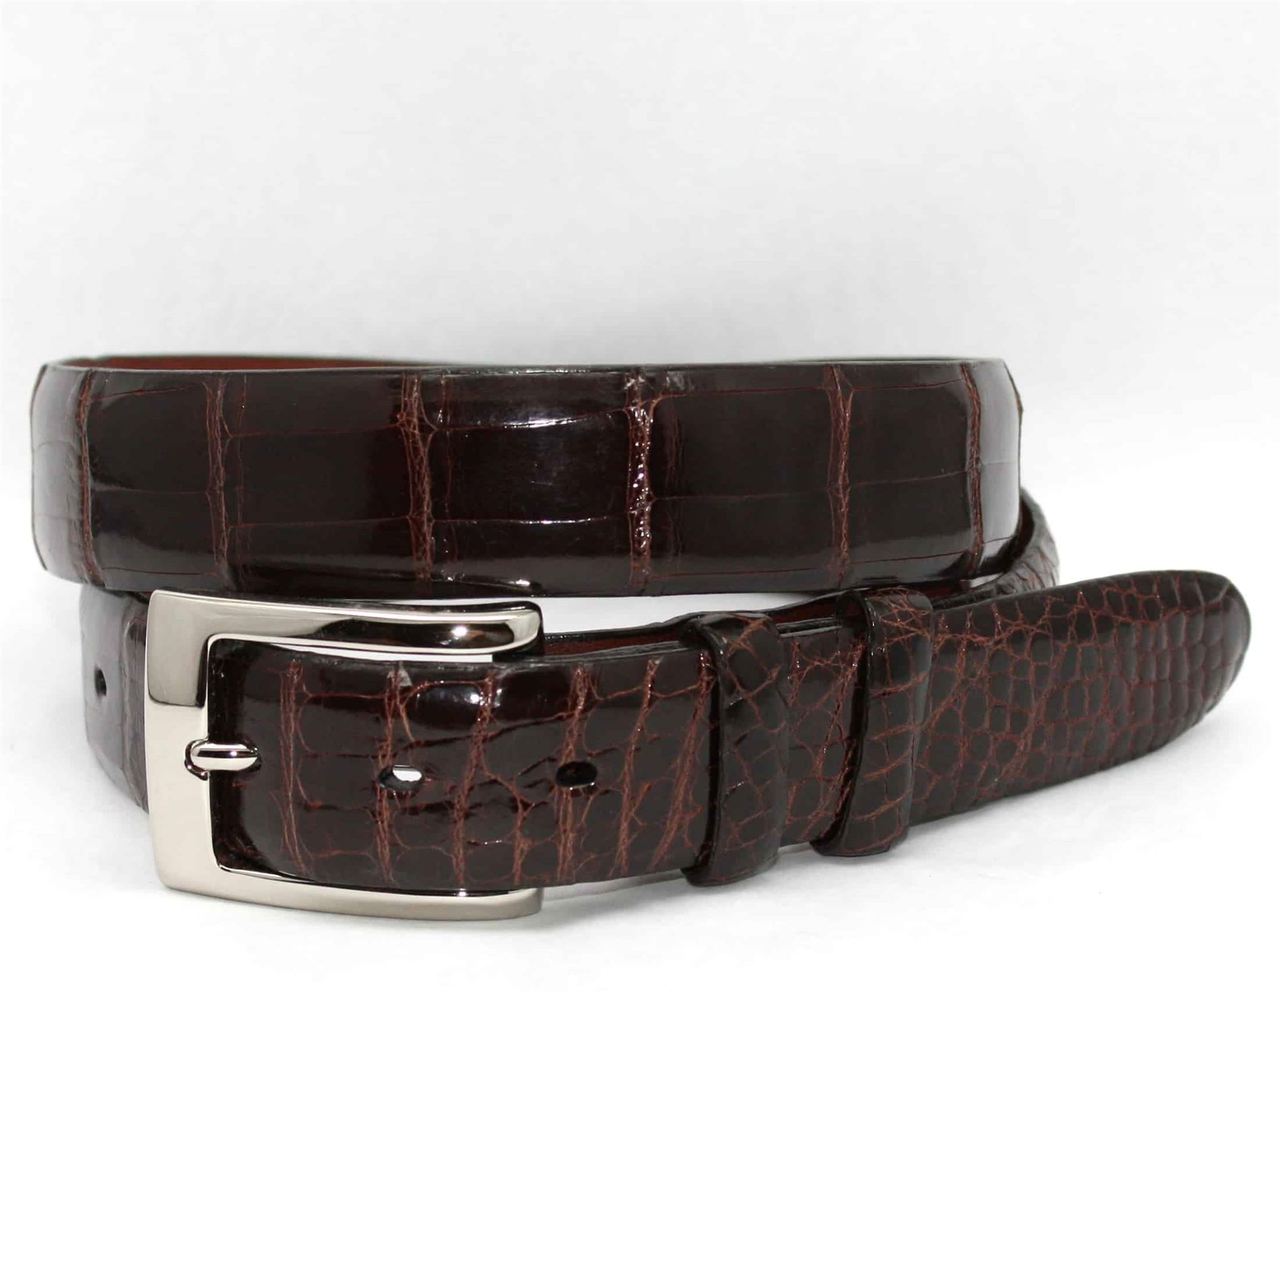 Genuine American Alligator Belt in Brown by Torino Leather Co